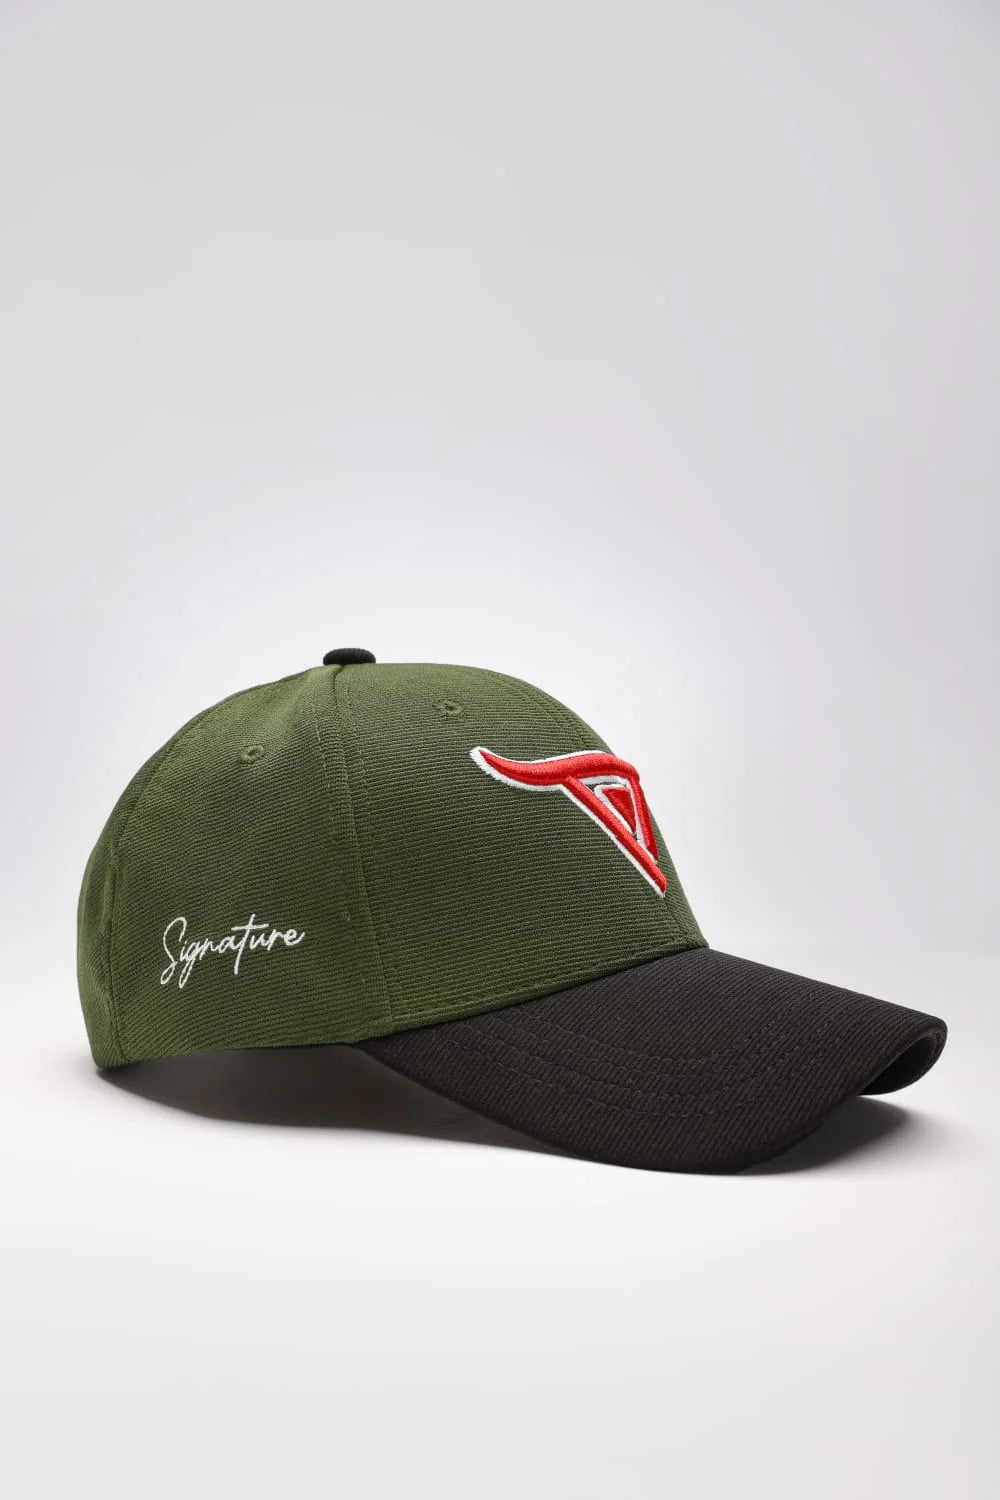 Unisex Green solid baseball cap, has a visor by One Player